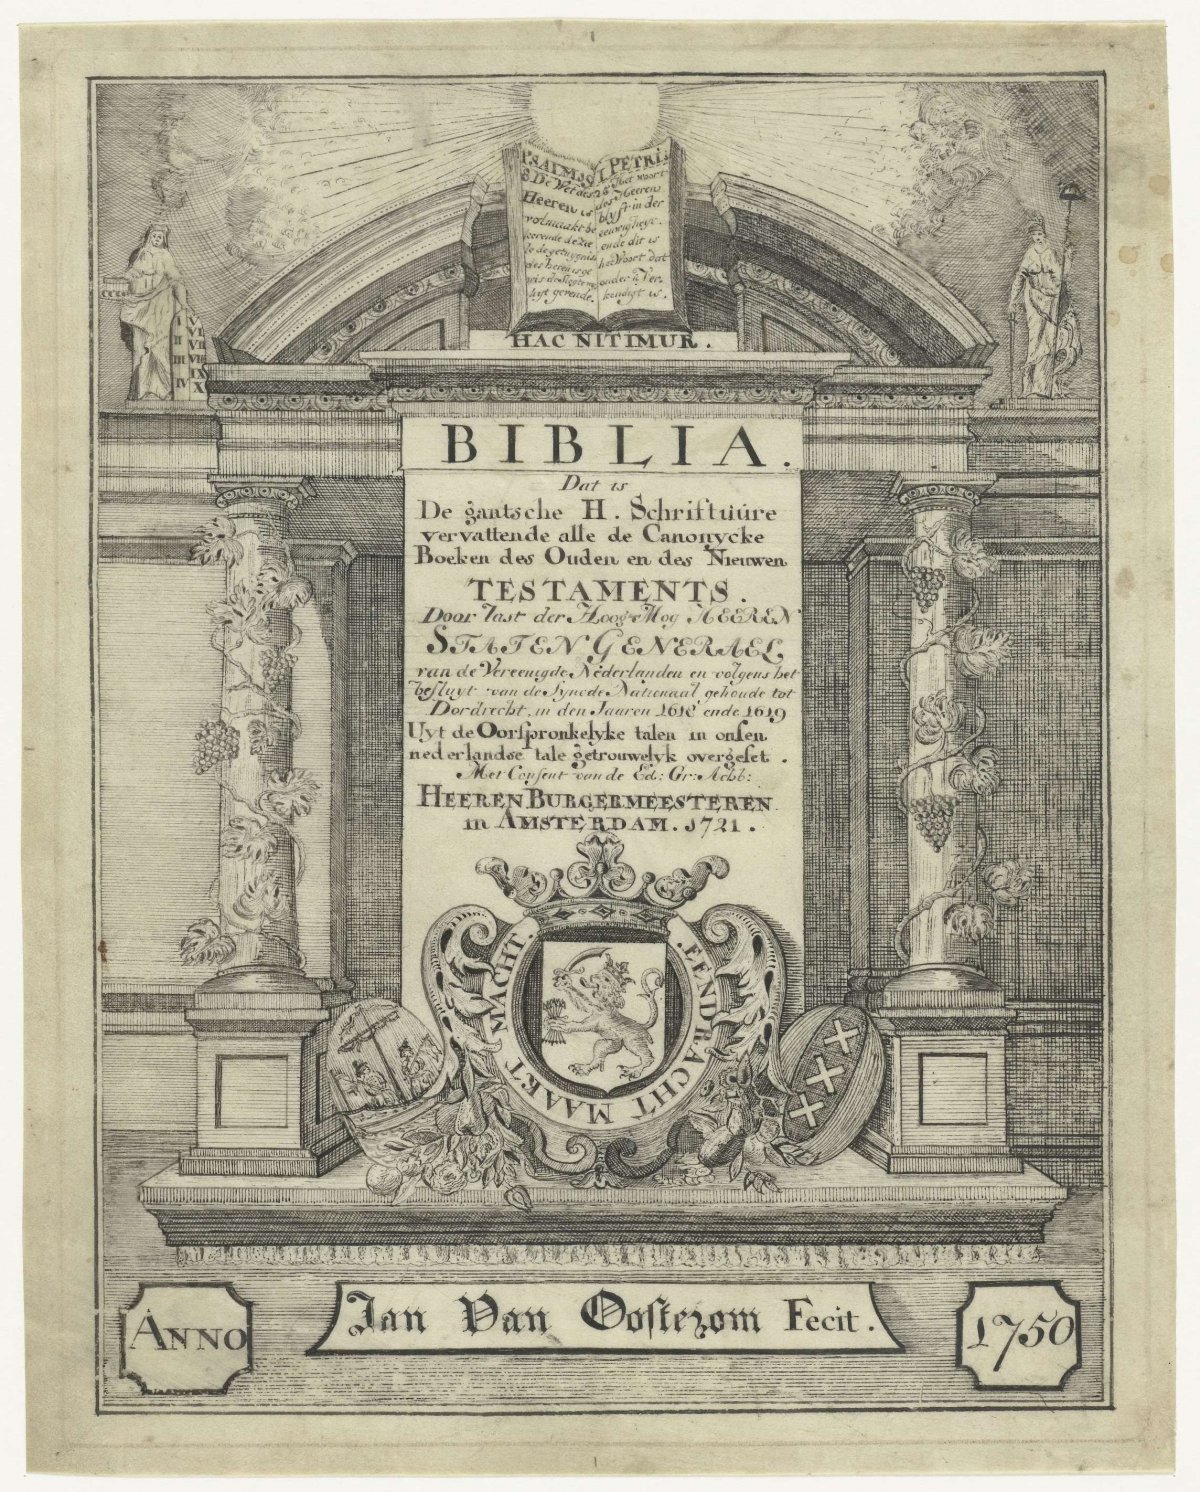 Title page of a 1721 Bible, Jan van Oosterom, 1750